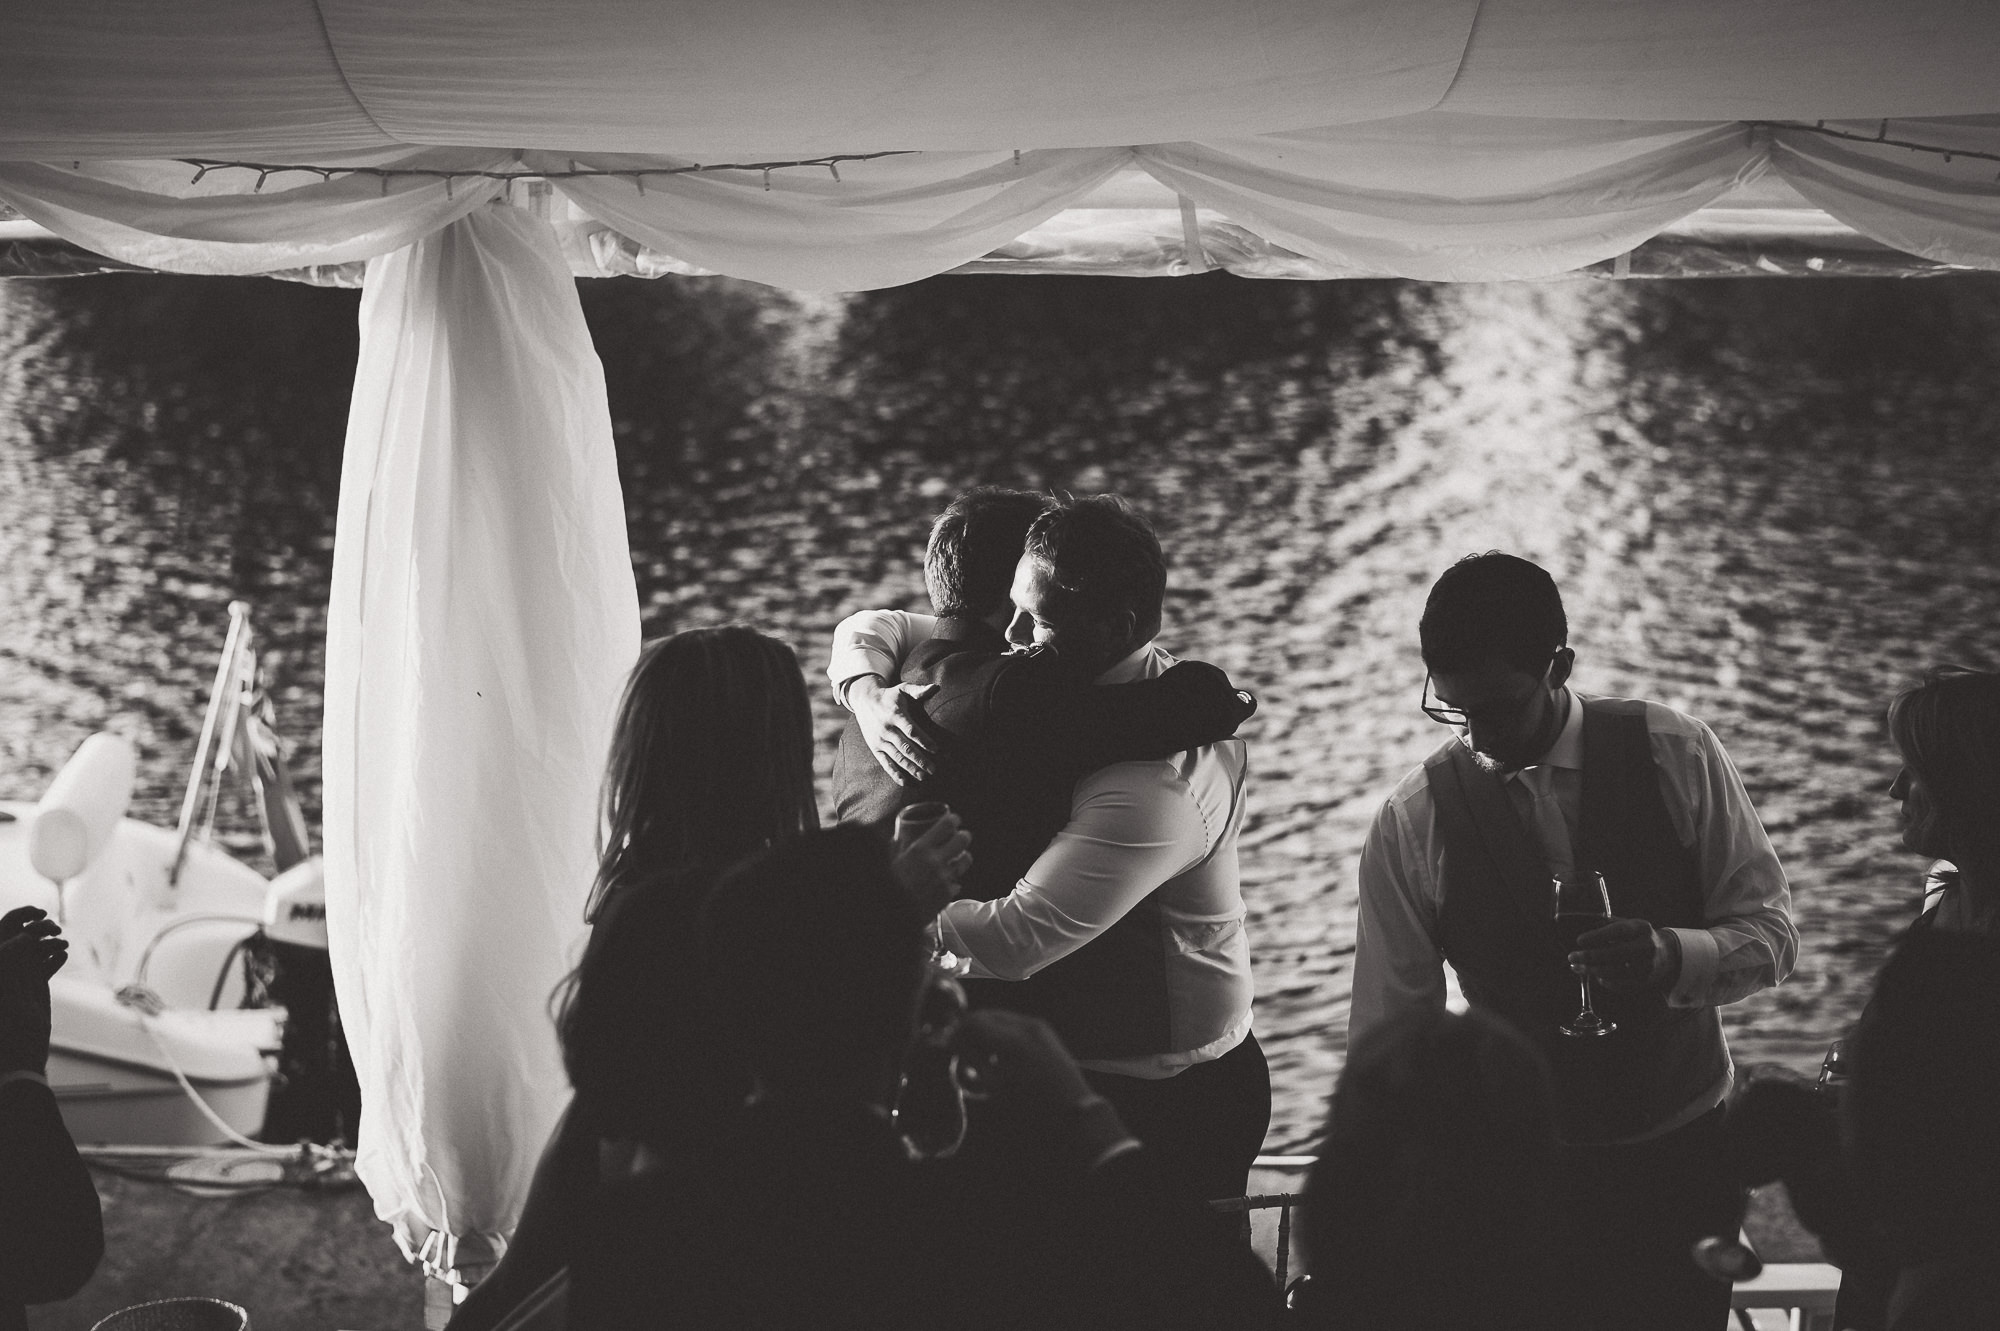 A wedding photo of a bride and groom hugging in front of a tent.